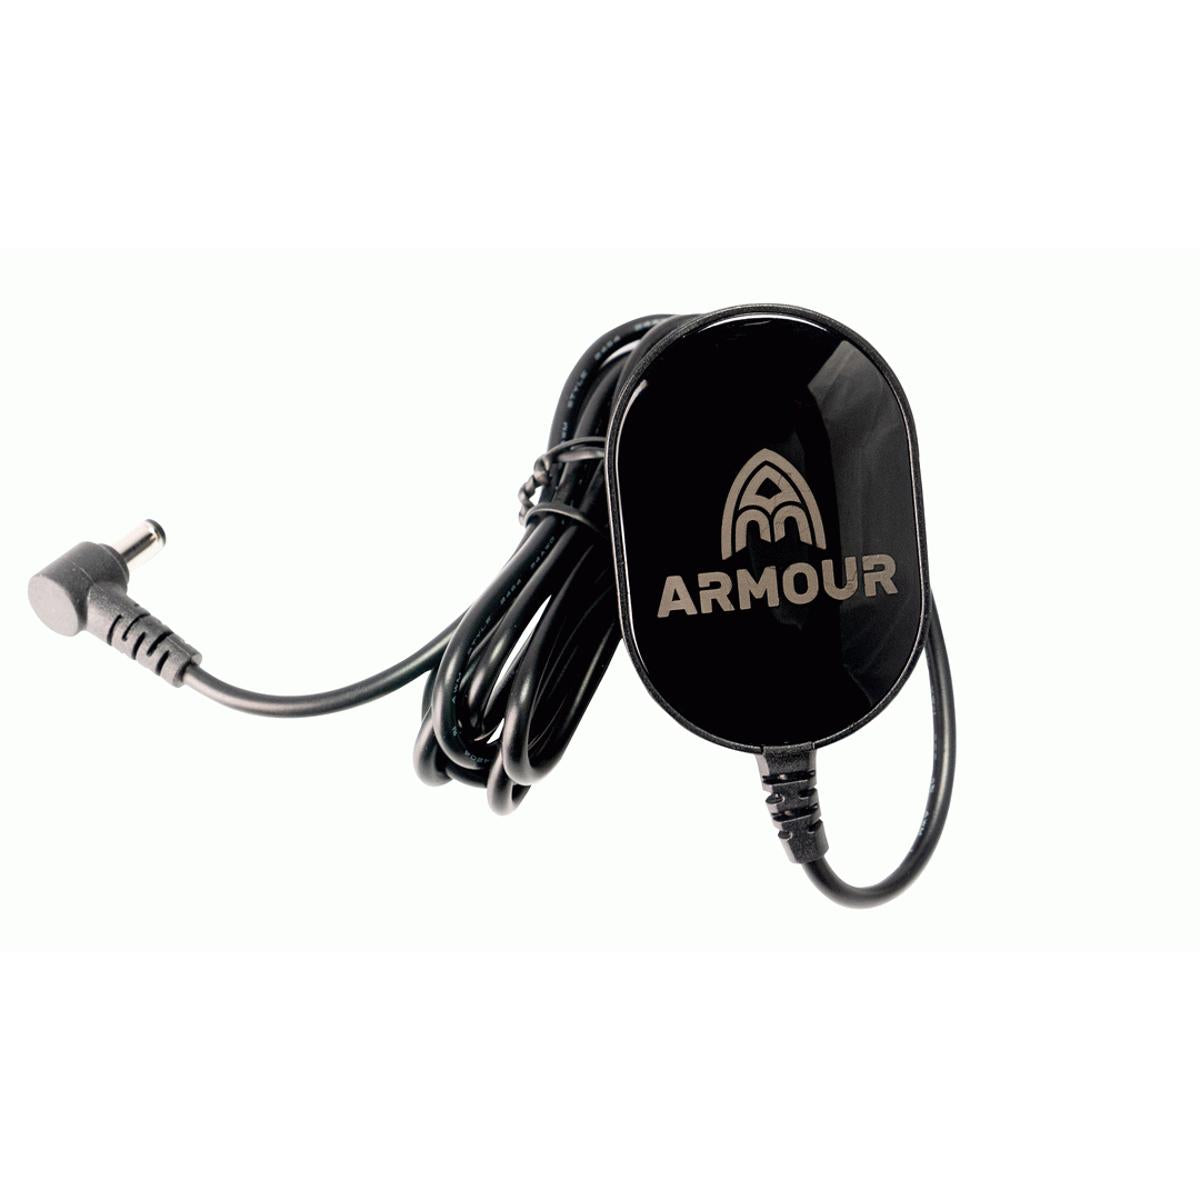 Armour Powersource 1 9V 1A Pedal Power Supply w/ 8-Way Daisy Chain